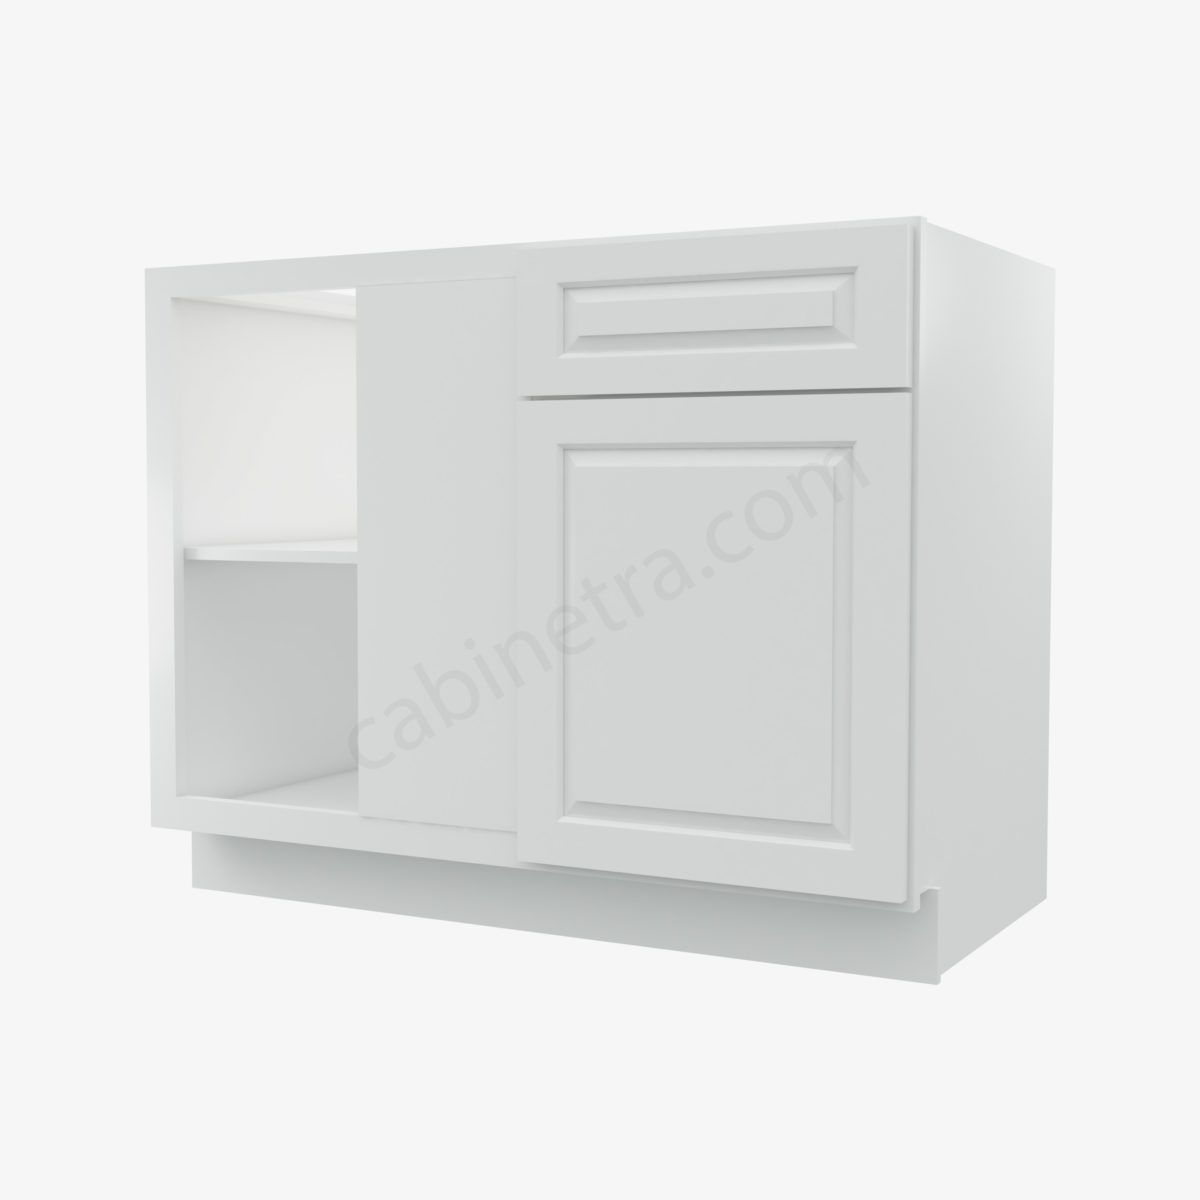 GW BBLC45 48 42W 0  Forevermark Gramercy White Cabinetra scaled